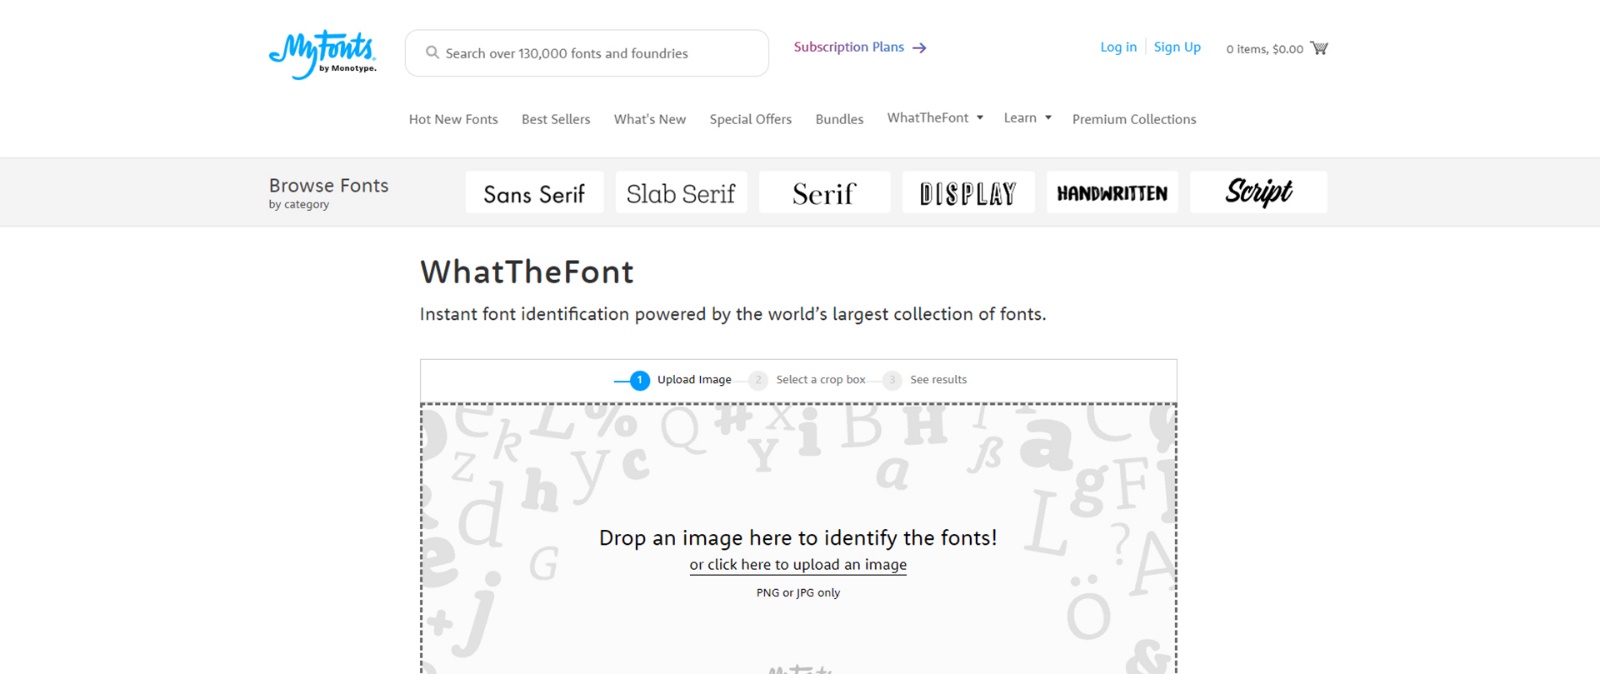 Screenshot of the myfont site that shows different fonts and photo upload location